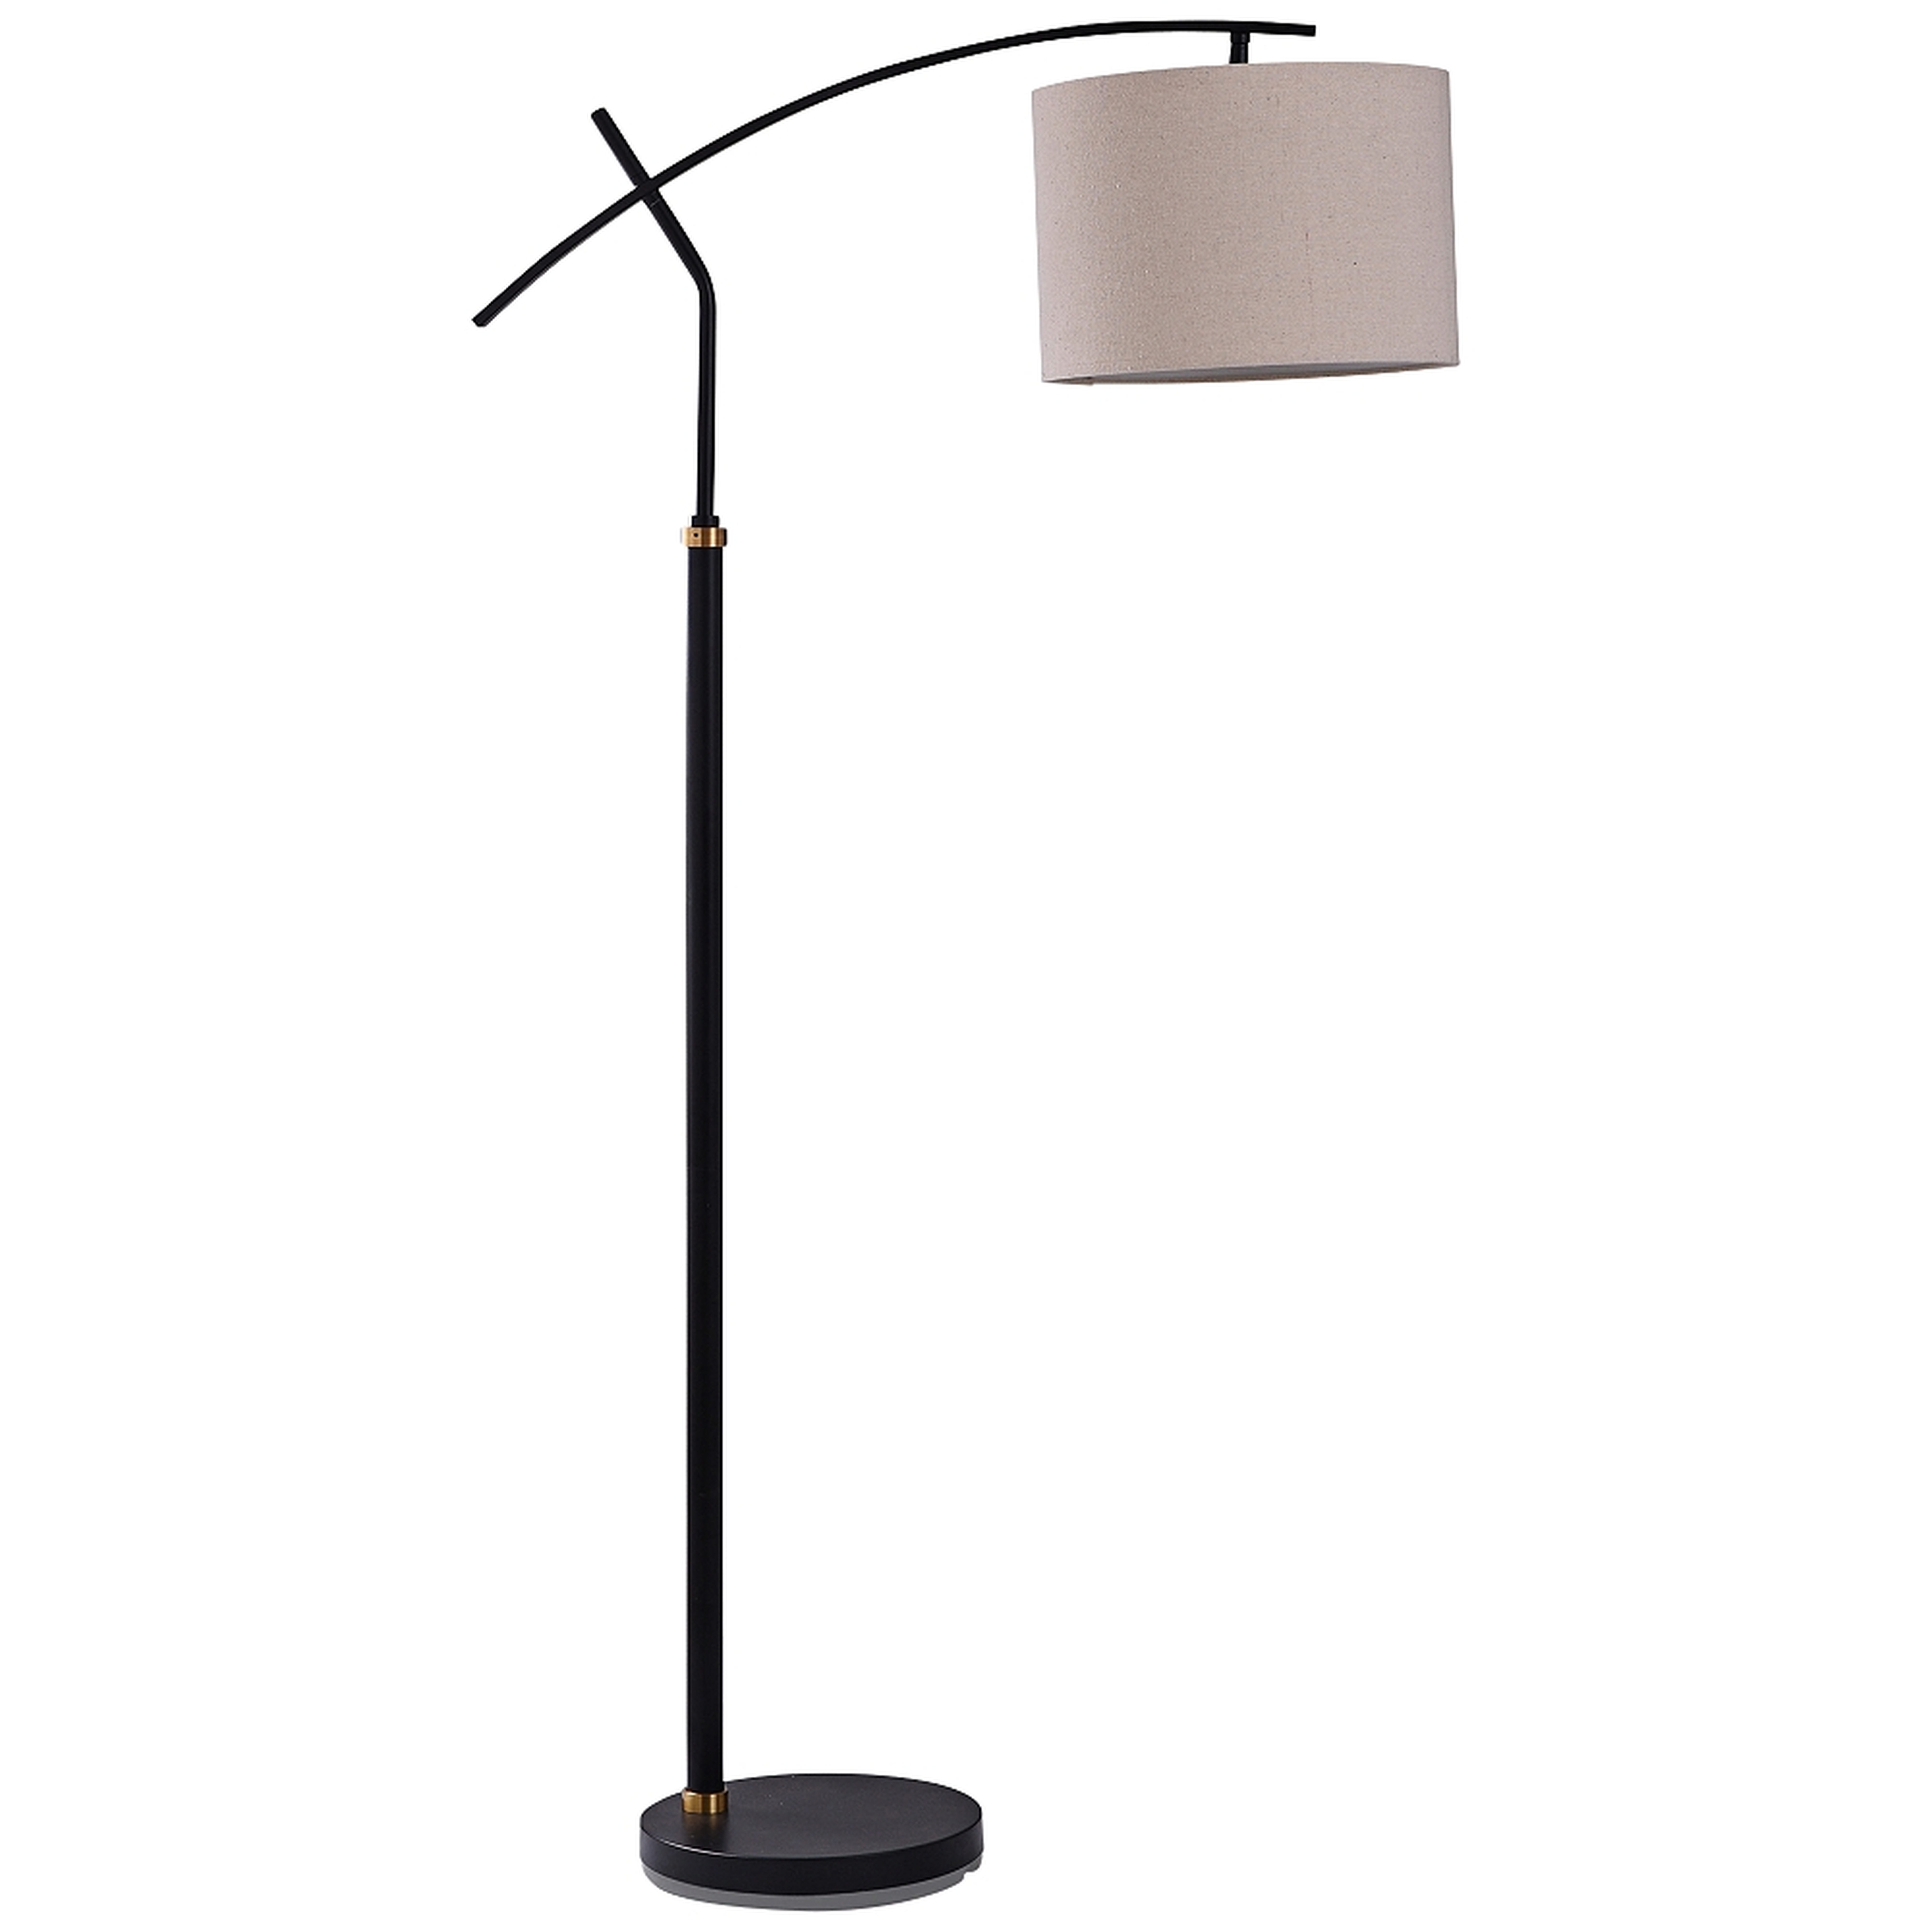 Dudley Black and Brass Metal Adjustable Arch Floor Lamp - Style # 93K54 - Lamps Plus